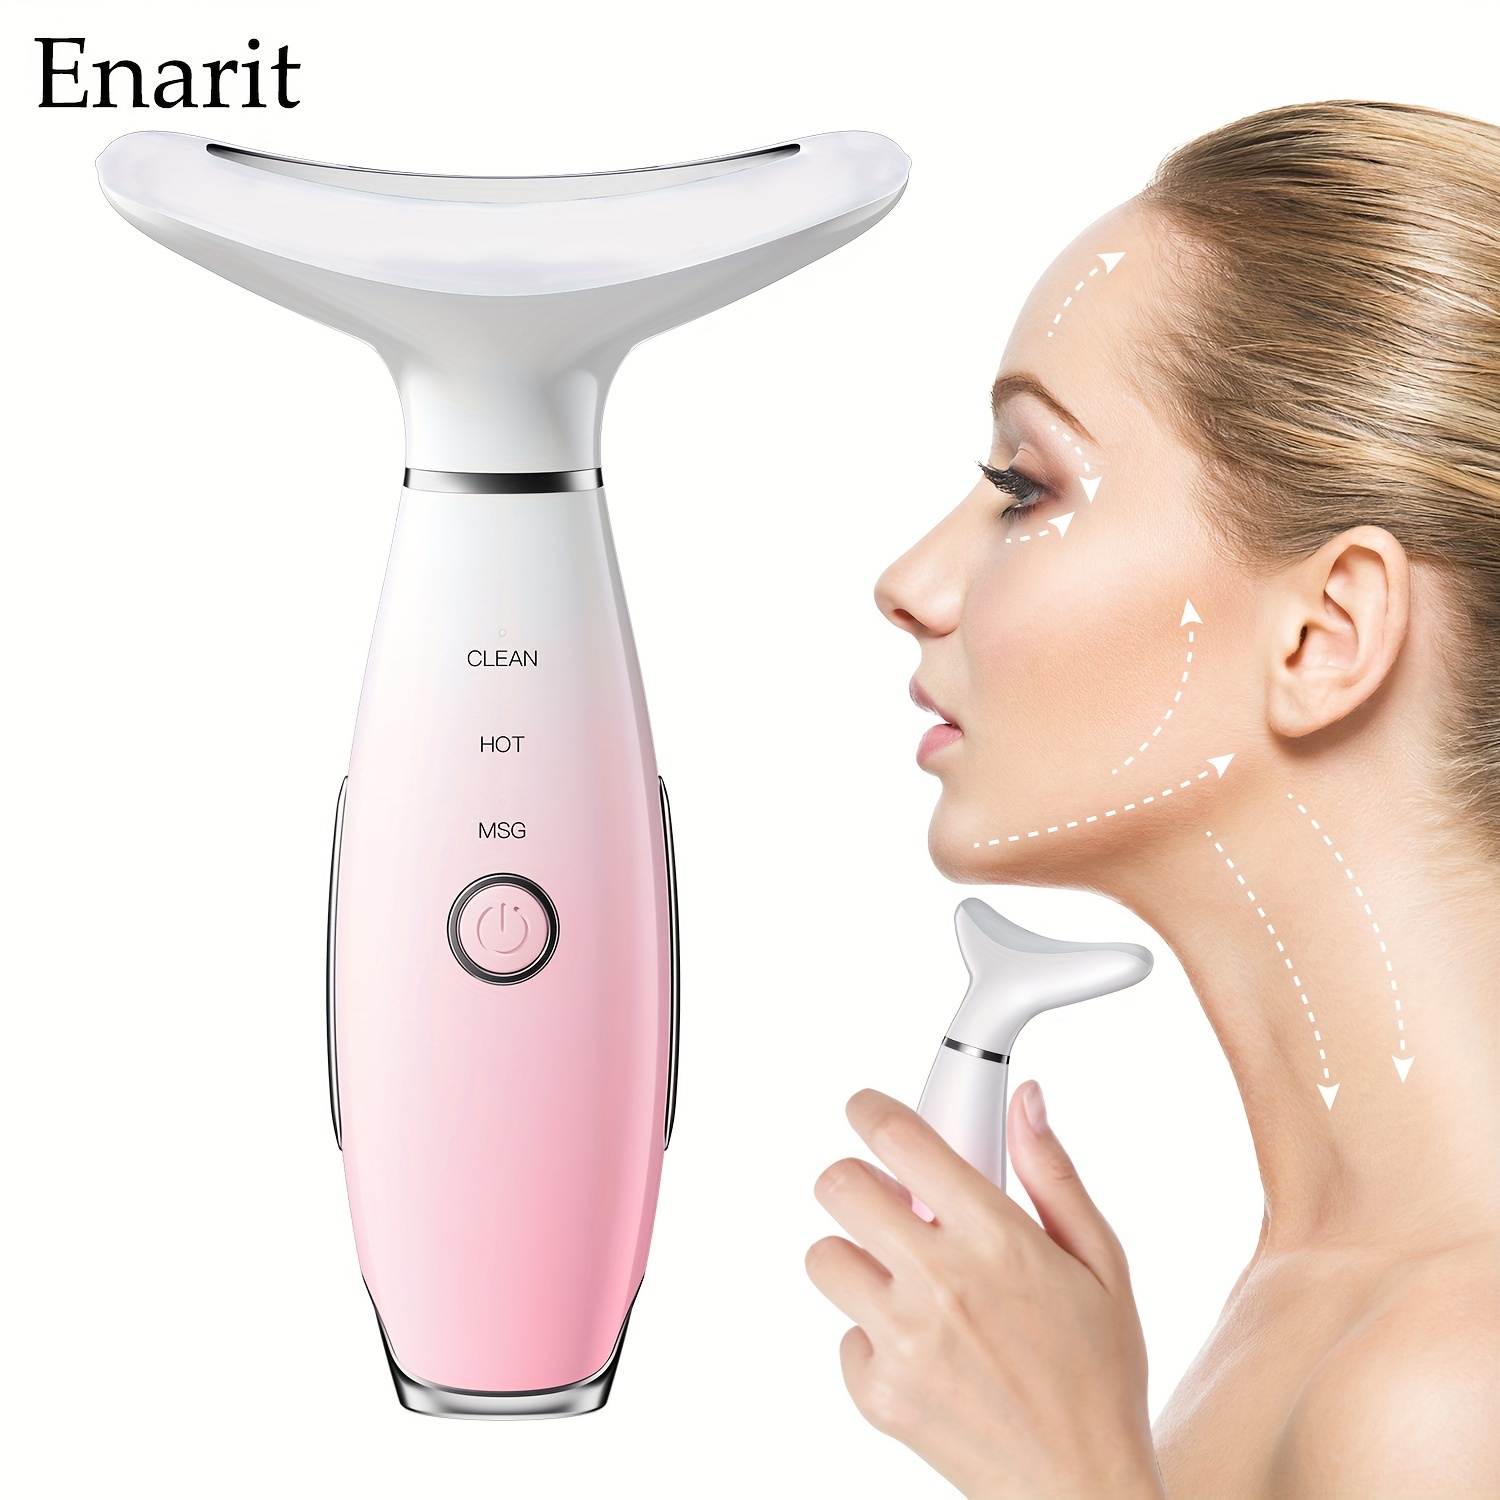 

Enarit Face And Neck Massager, Facial Skin Care Beauty Meter, Rechargeable Adjustable Heating Vibration Mode, Neck And Facial Skin Massage Tool, Women's